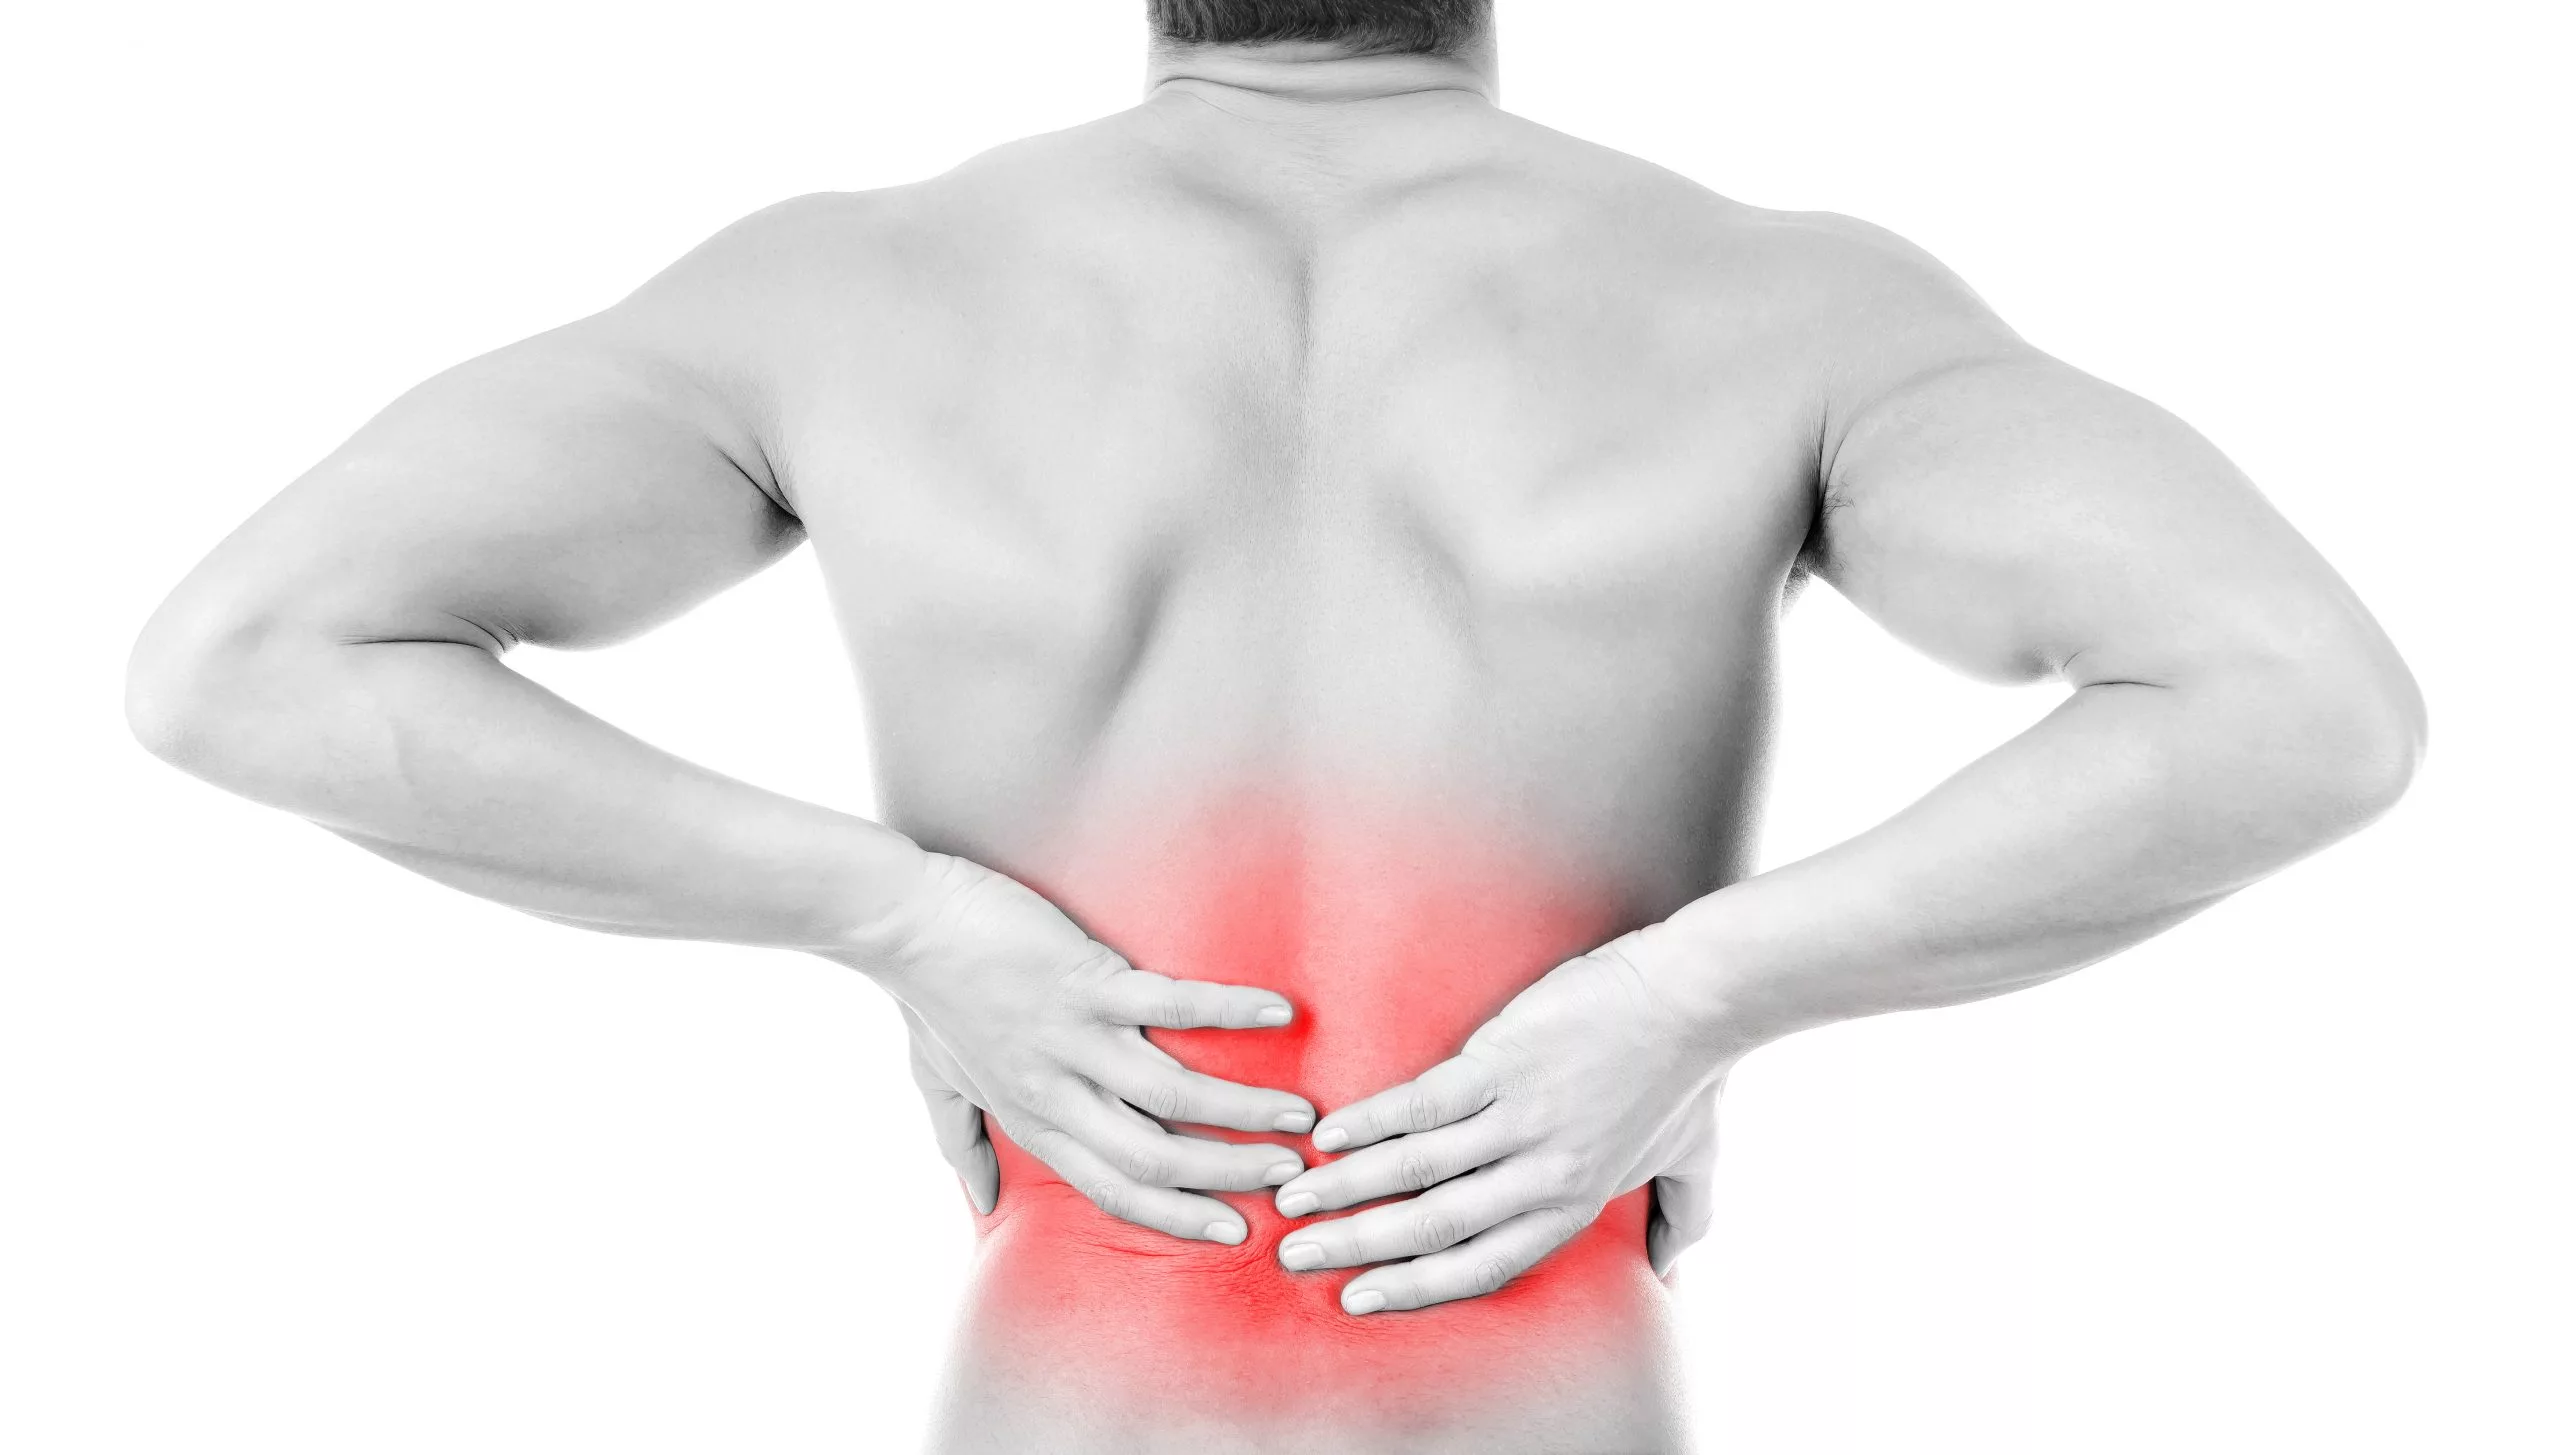 what does a chiropractor do for lower back pain?